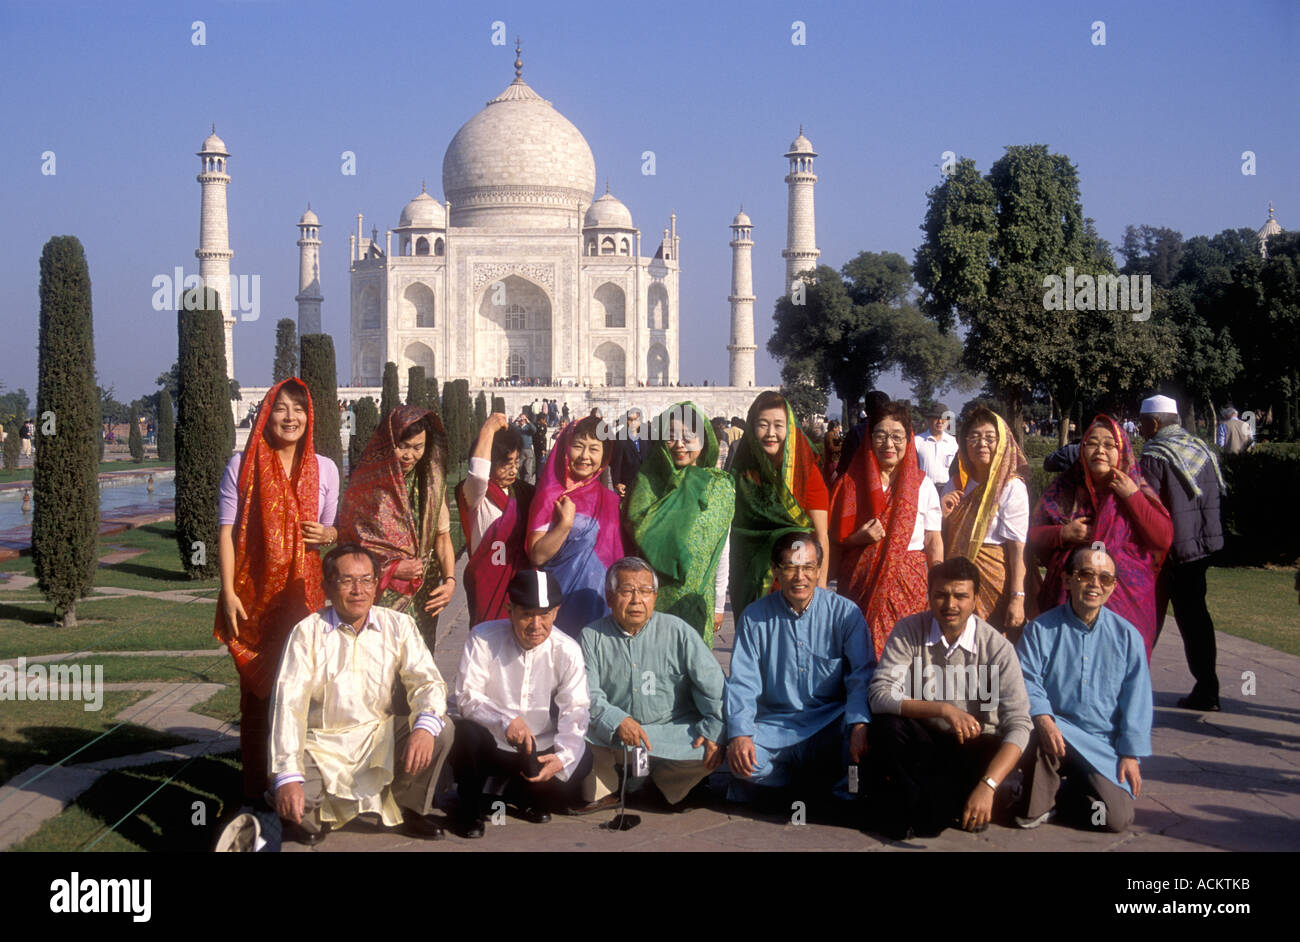 Japanese tourists posing for a photograph in front of the Taj Mahal Agra Uttar Pradesh India Stock Photo